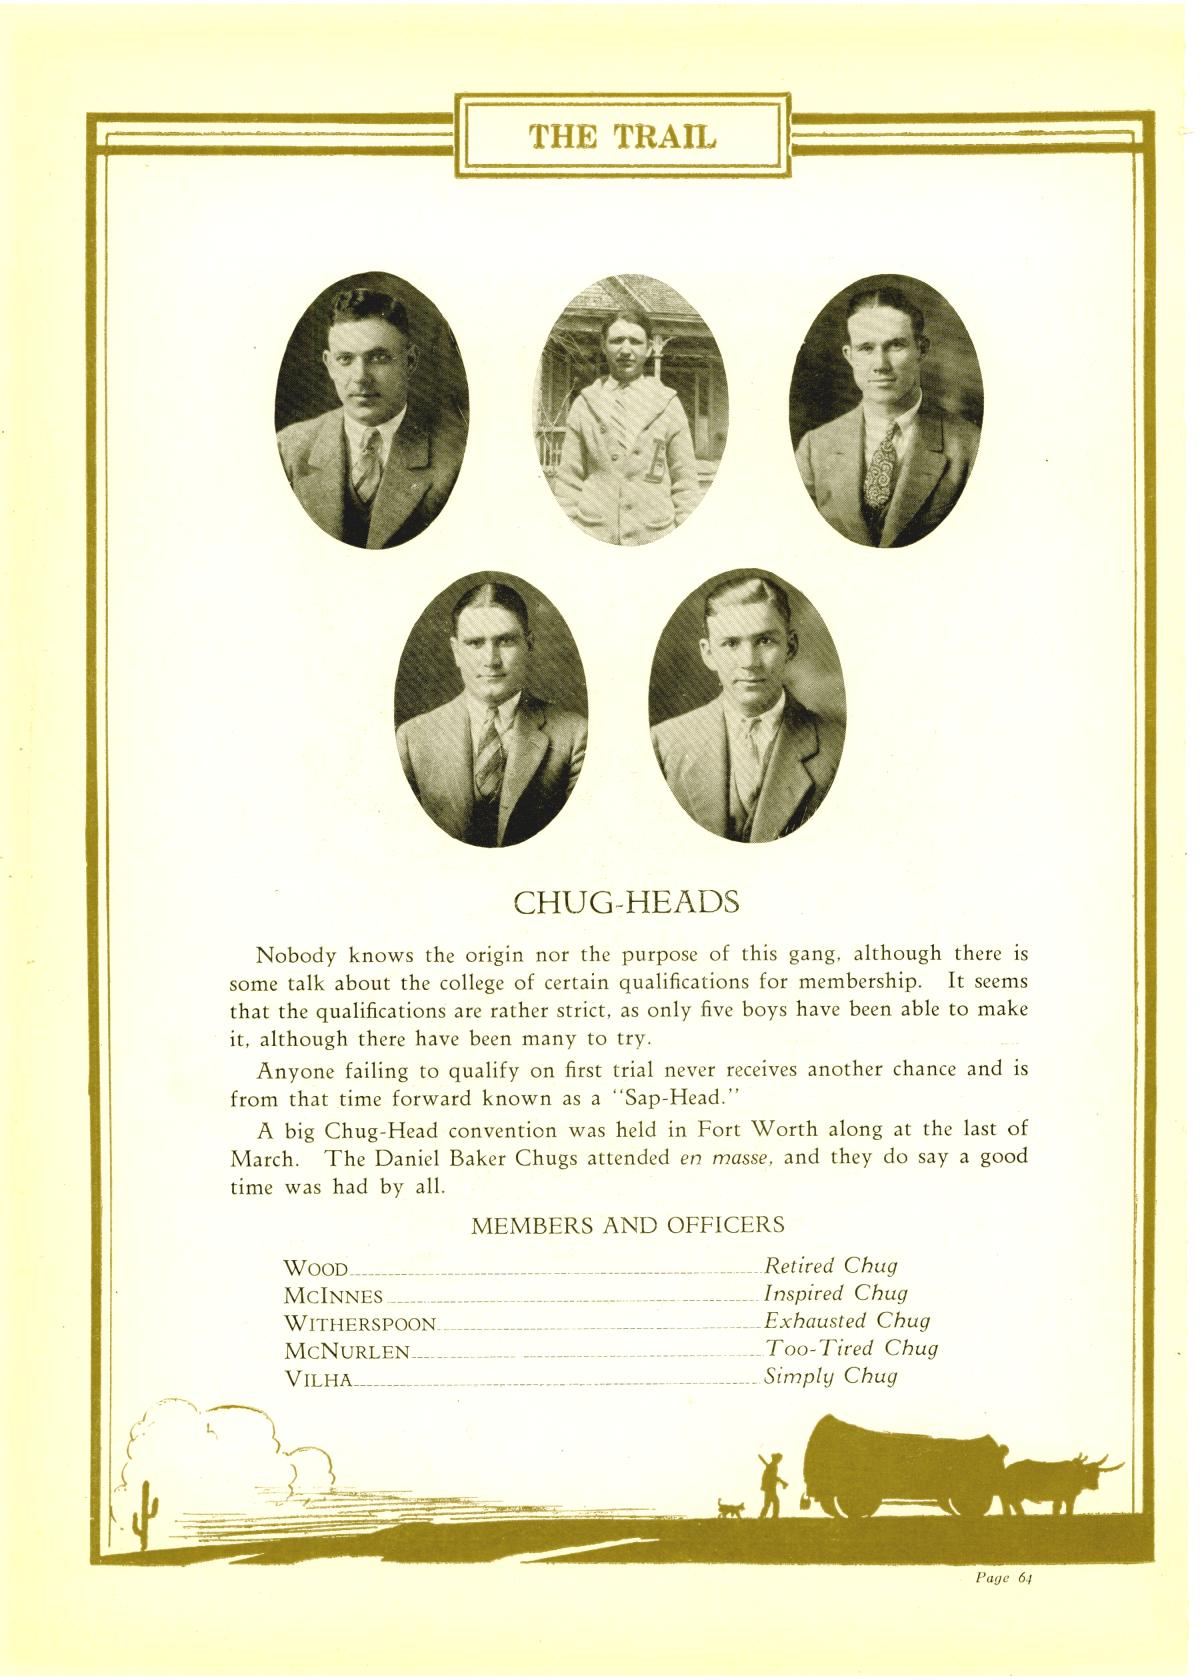 The Trail, Yearbook of Daniel Baker College, 1926
                                                
                                                    64
                                                